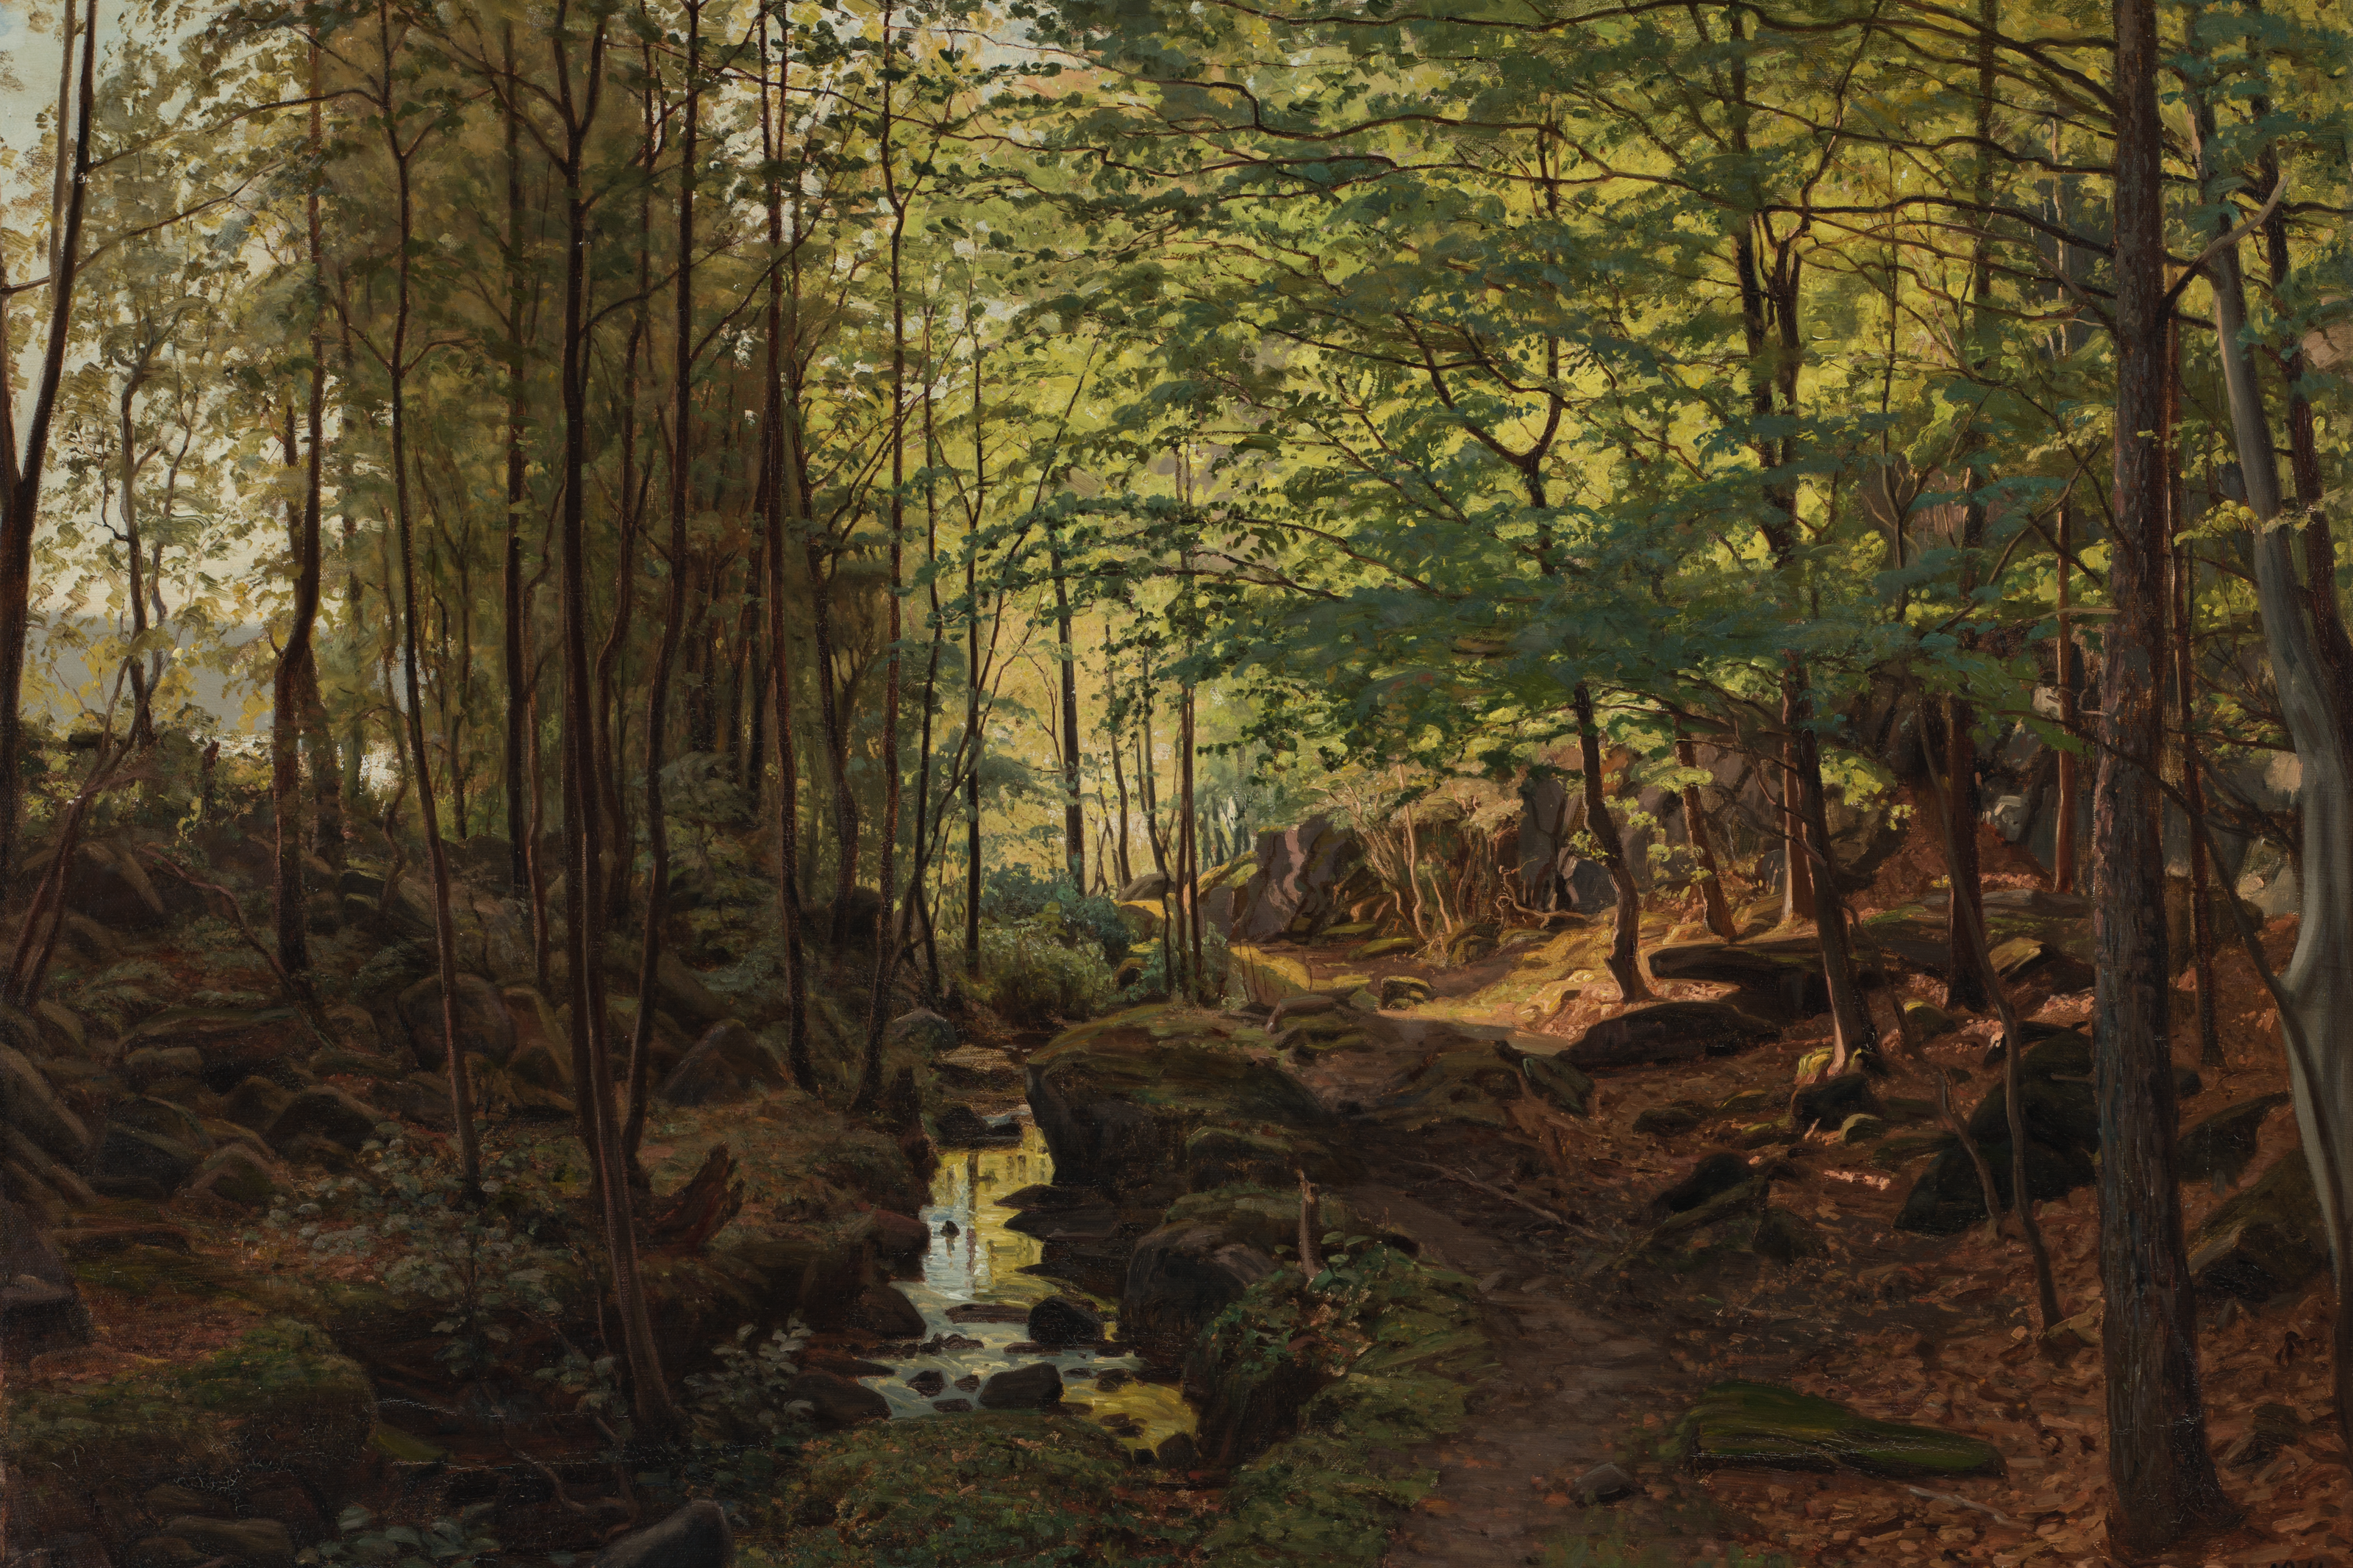 Art work showing a forest with a small river flowing thorugh